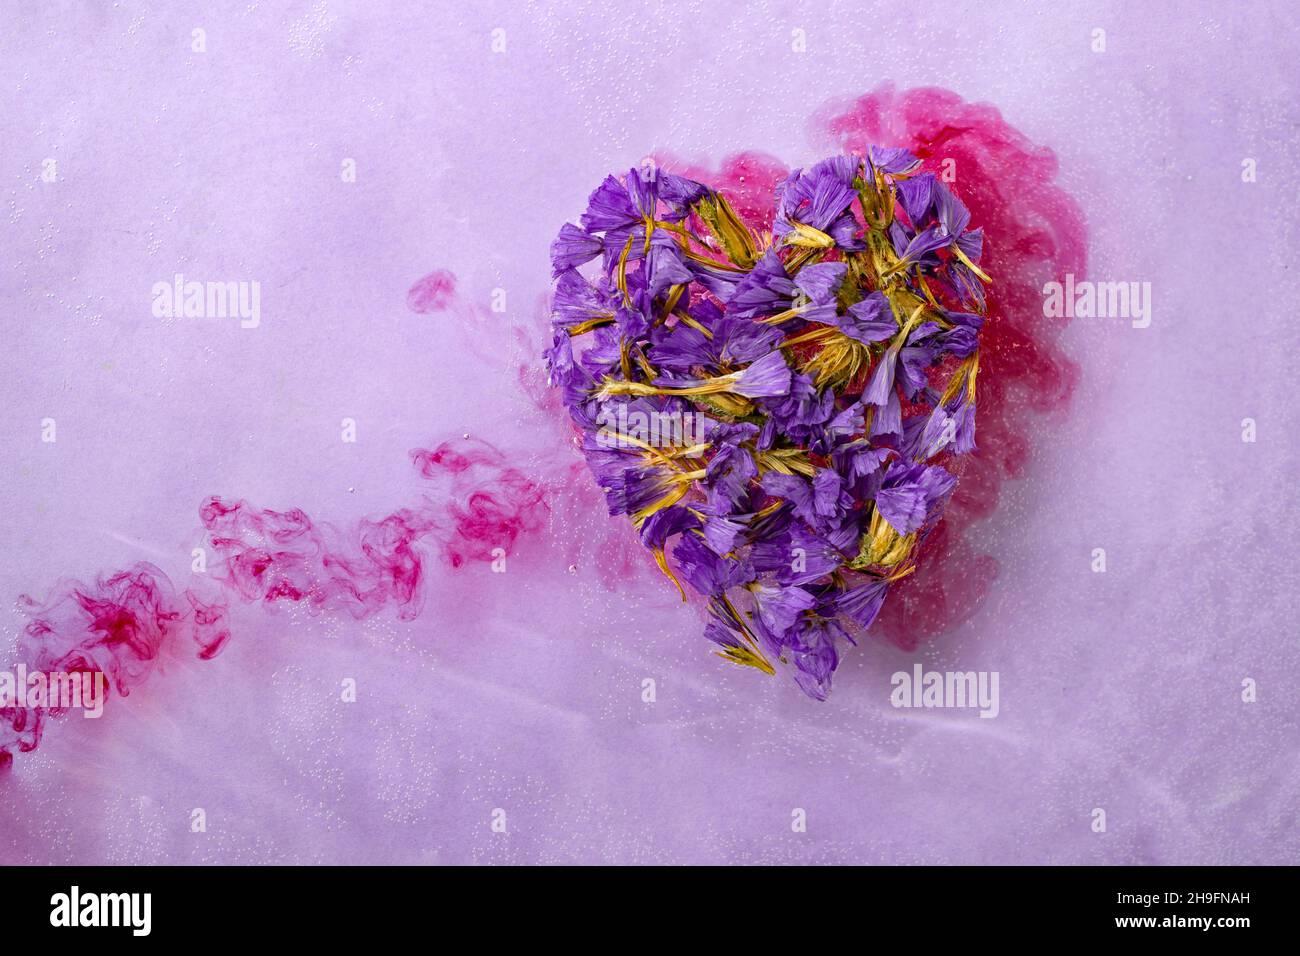 heart made of dried purple flowers, floating on water over a heart made of blood Stock Photo